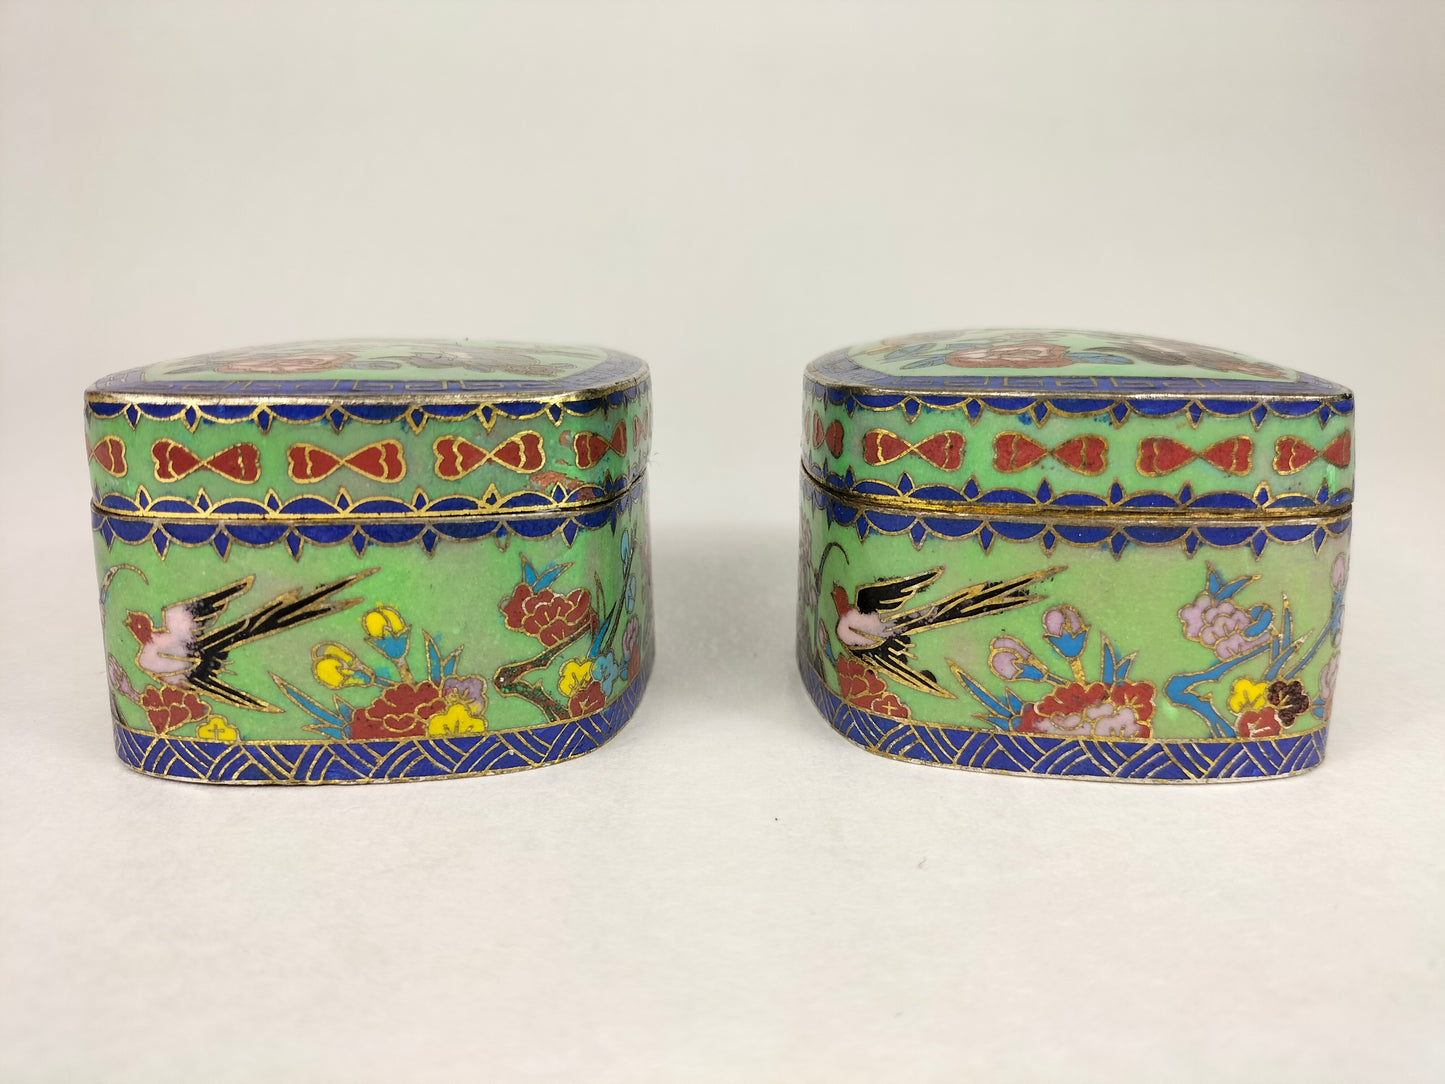 Pair of Chinese cloisonne lidded boxes decorated with dogs and floral motifs // Republic Period (1912-1949)